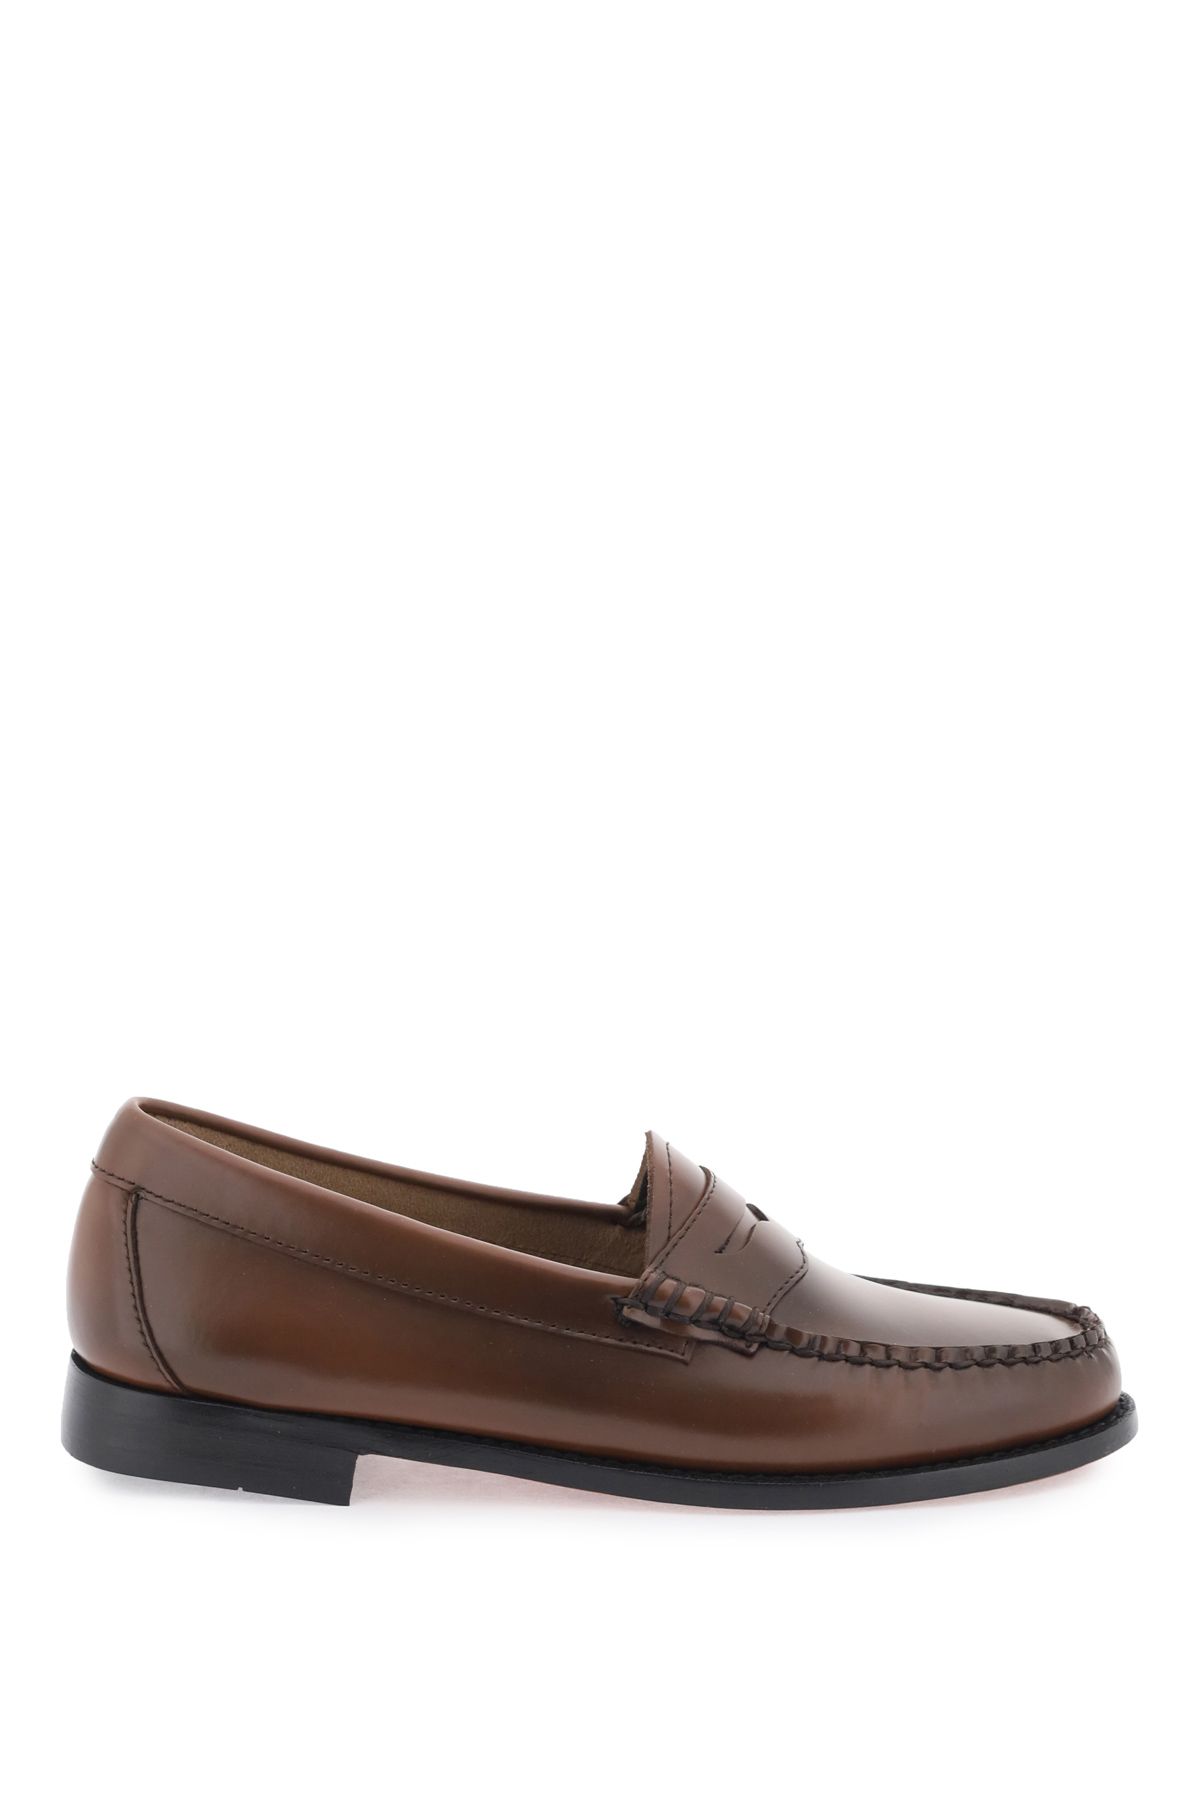 Shop Gh Bass 'weejuns' Penny Loafers In Brown